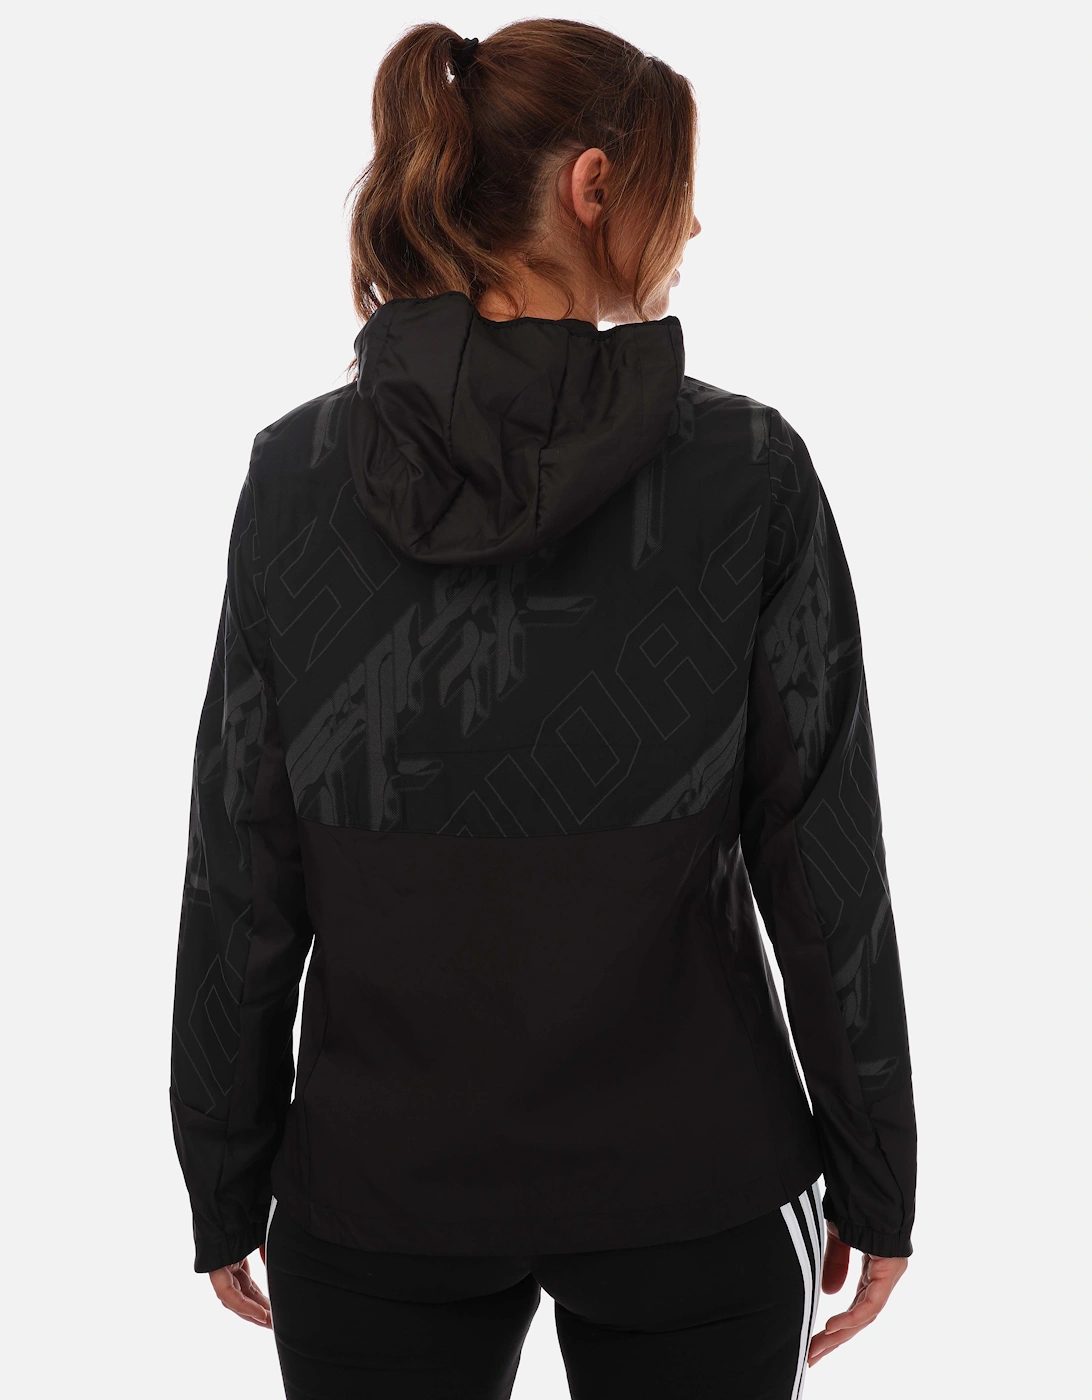 Womens Own The Run Reflective Jacket